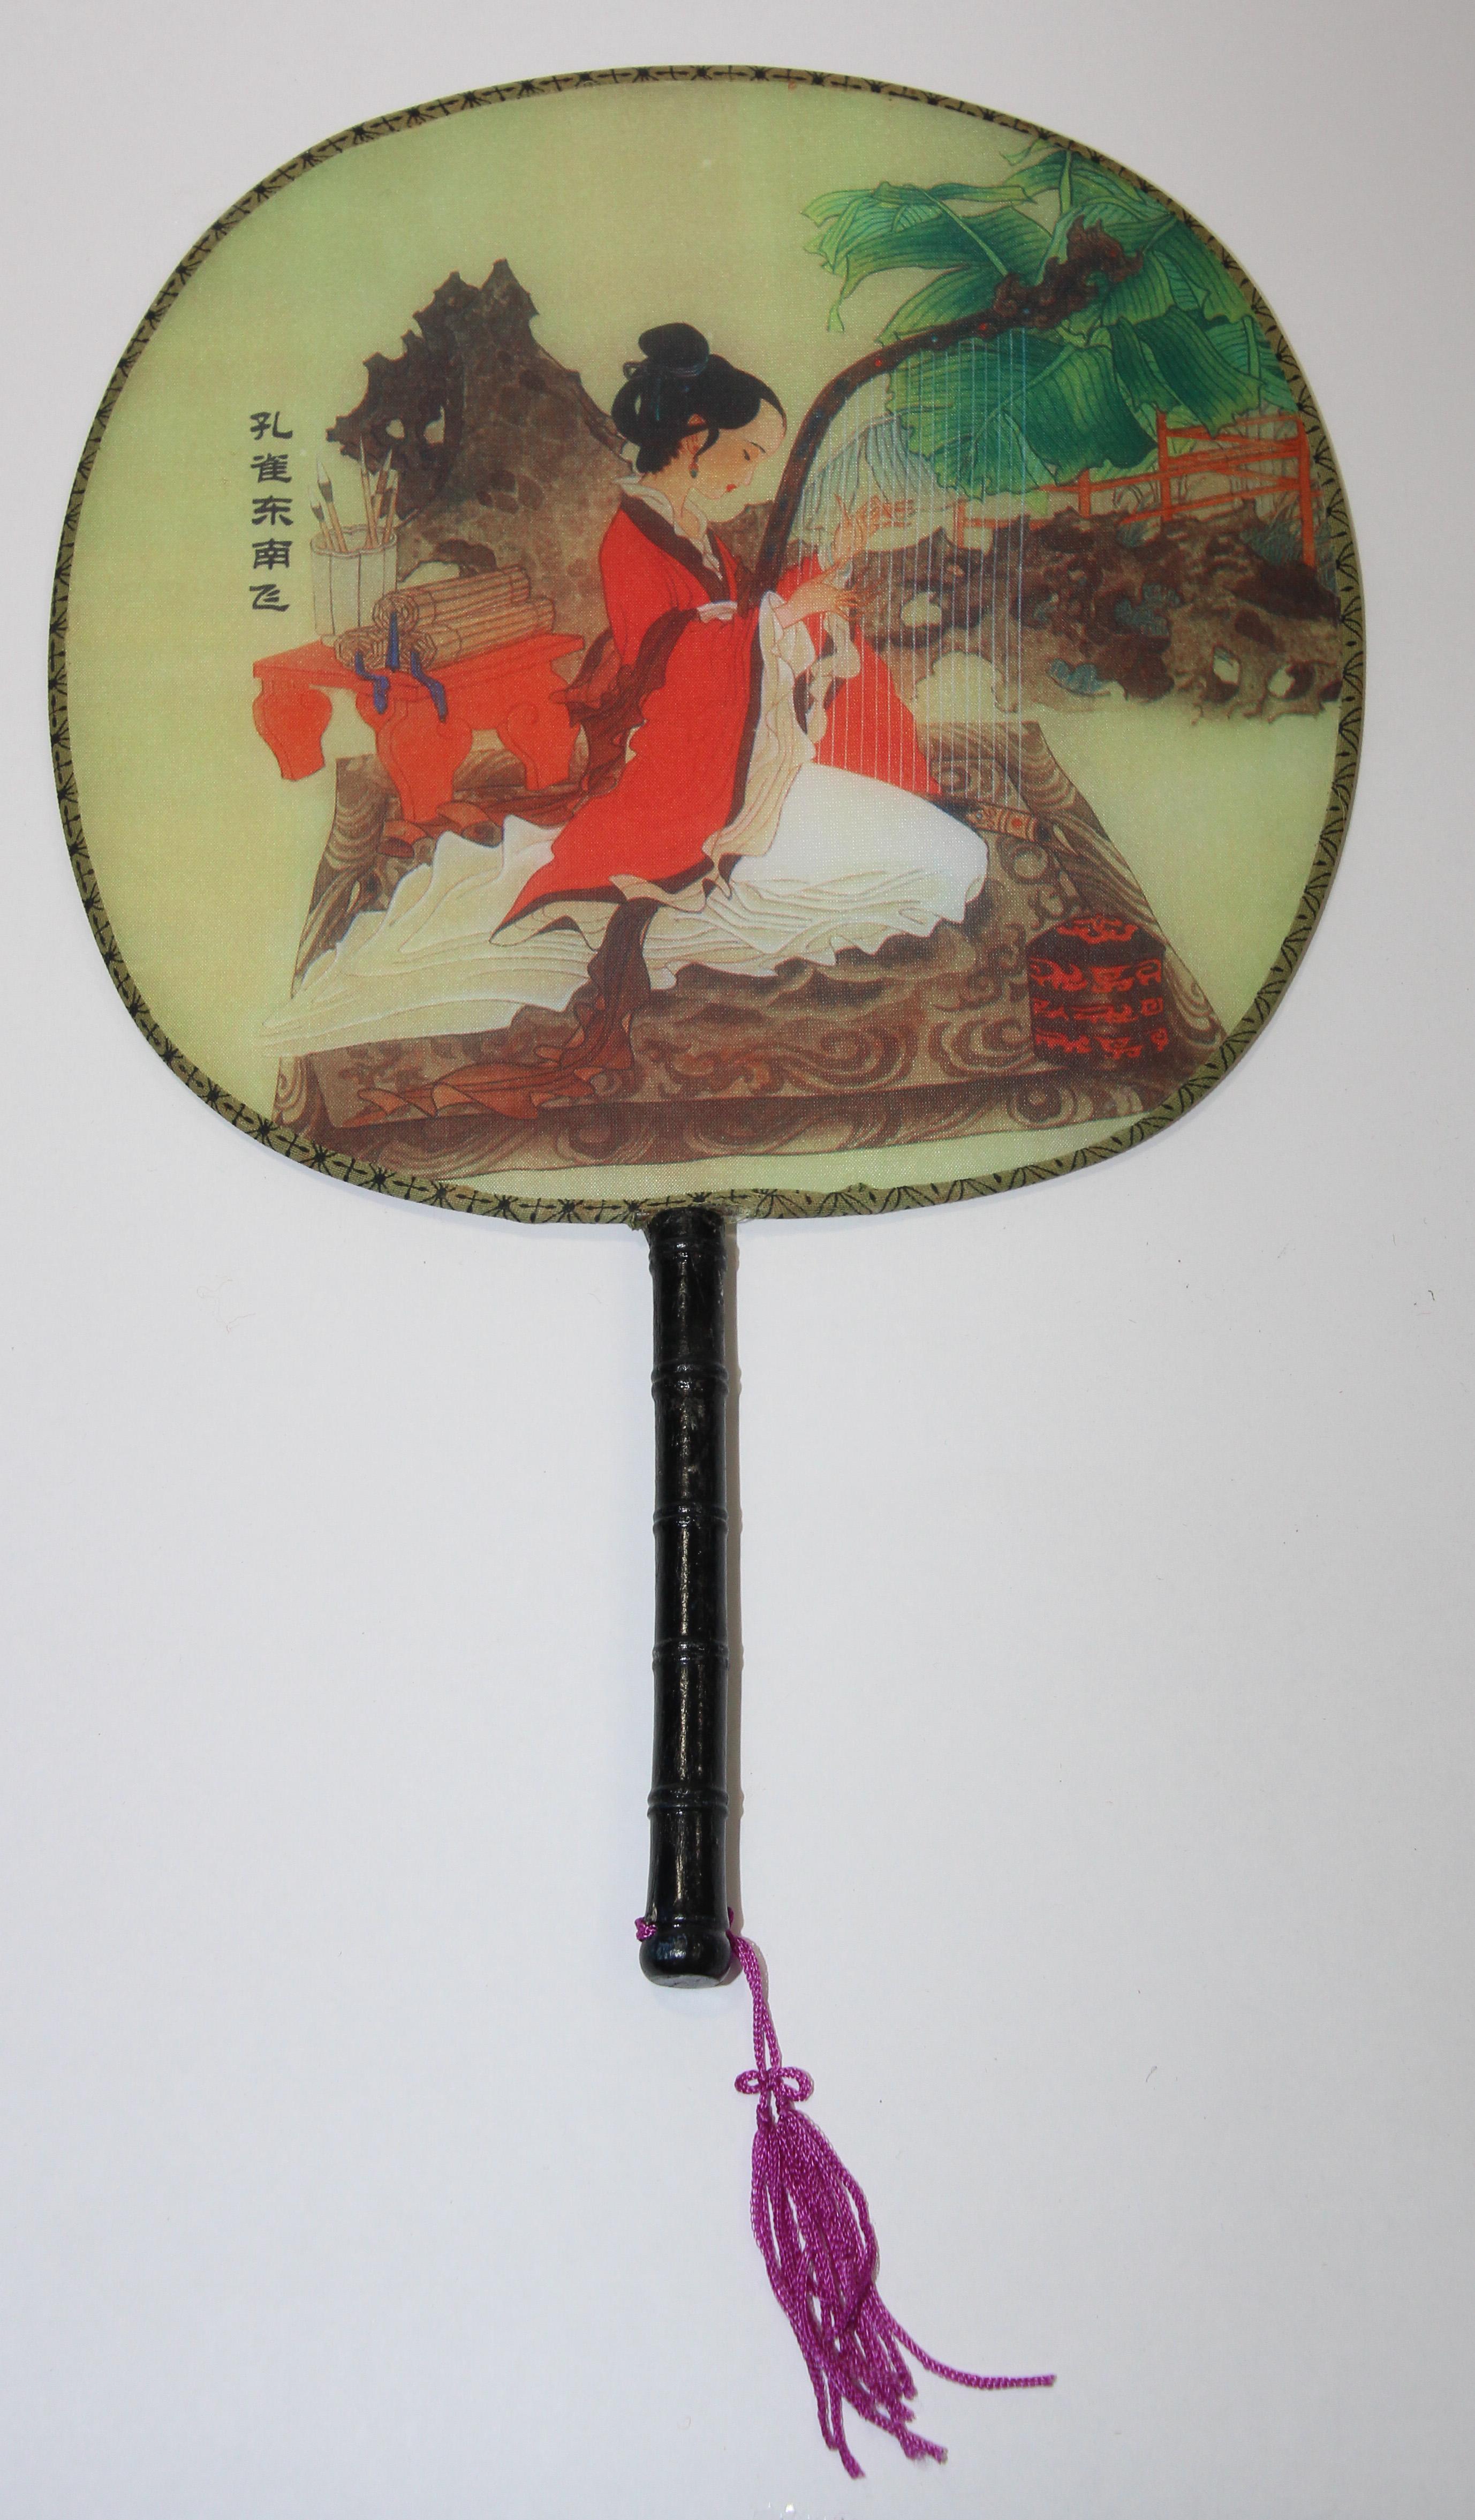 20th Century Chinese Silk Round Paddle Fans, Hand Fan with Geisha Woman Design